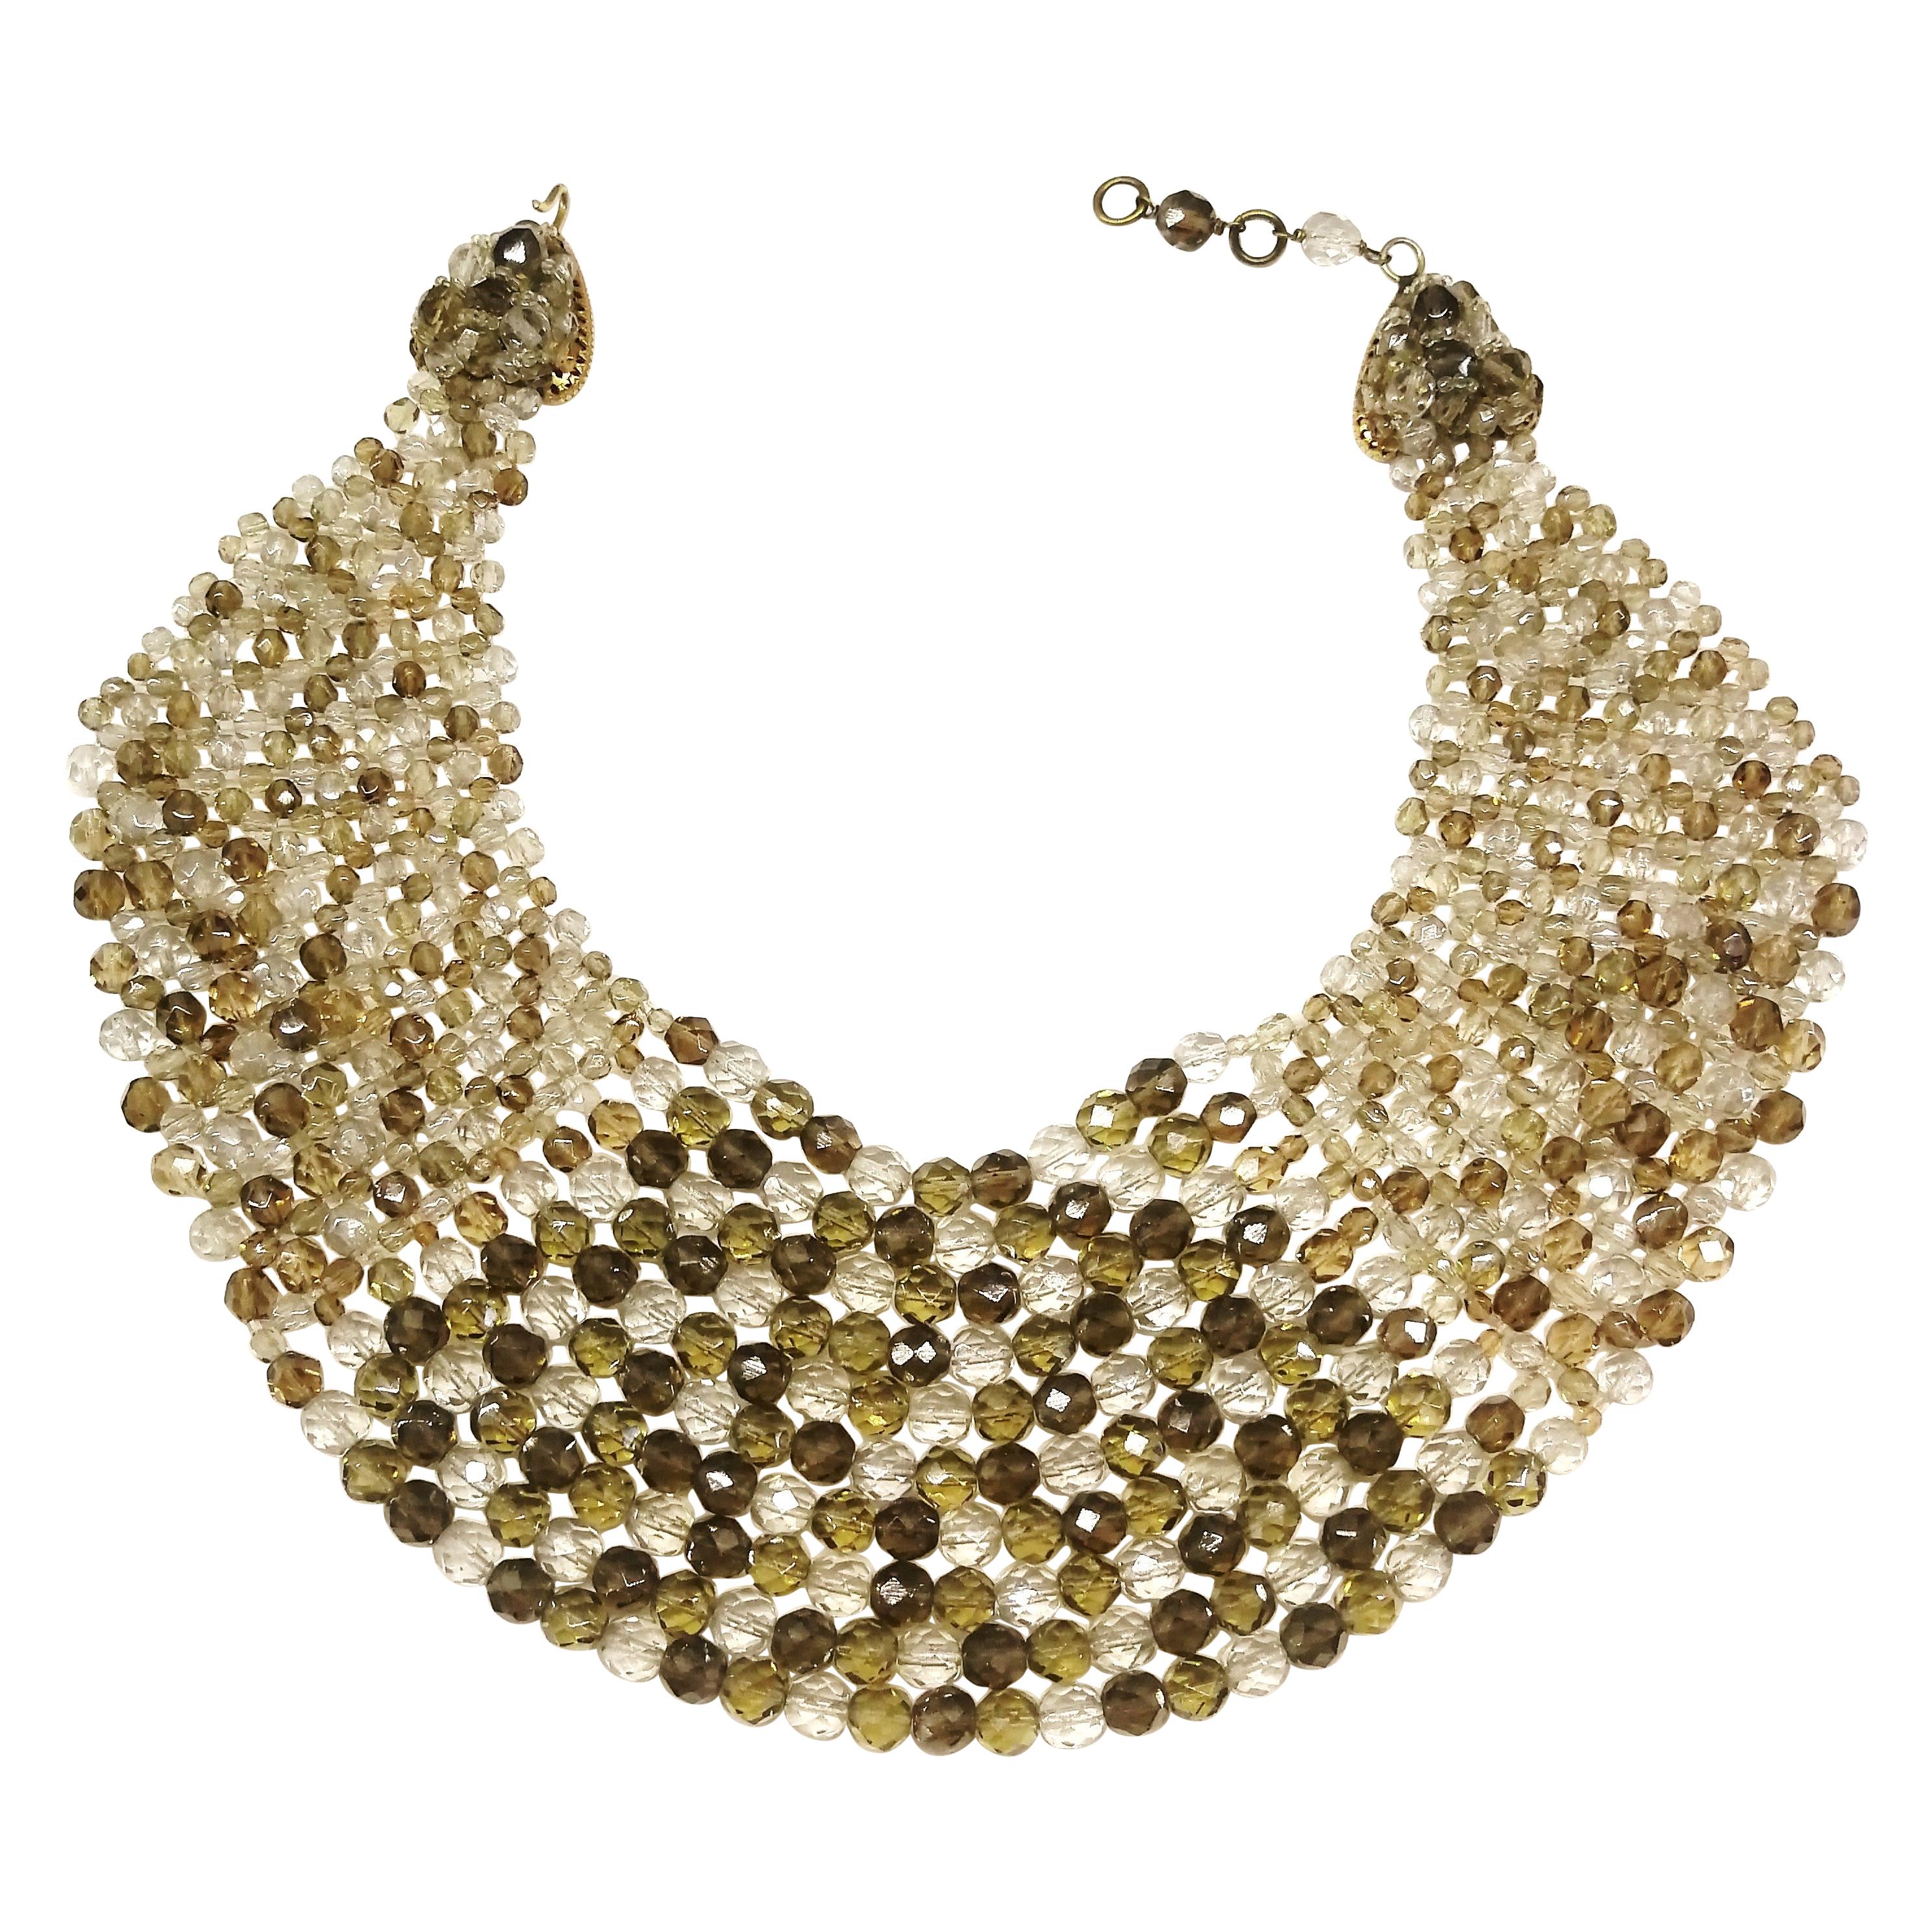 Smokey quartz, taupe and clear glass bead collar, Coppola e Toppo, early 1960s.